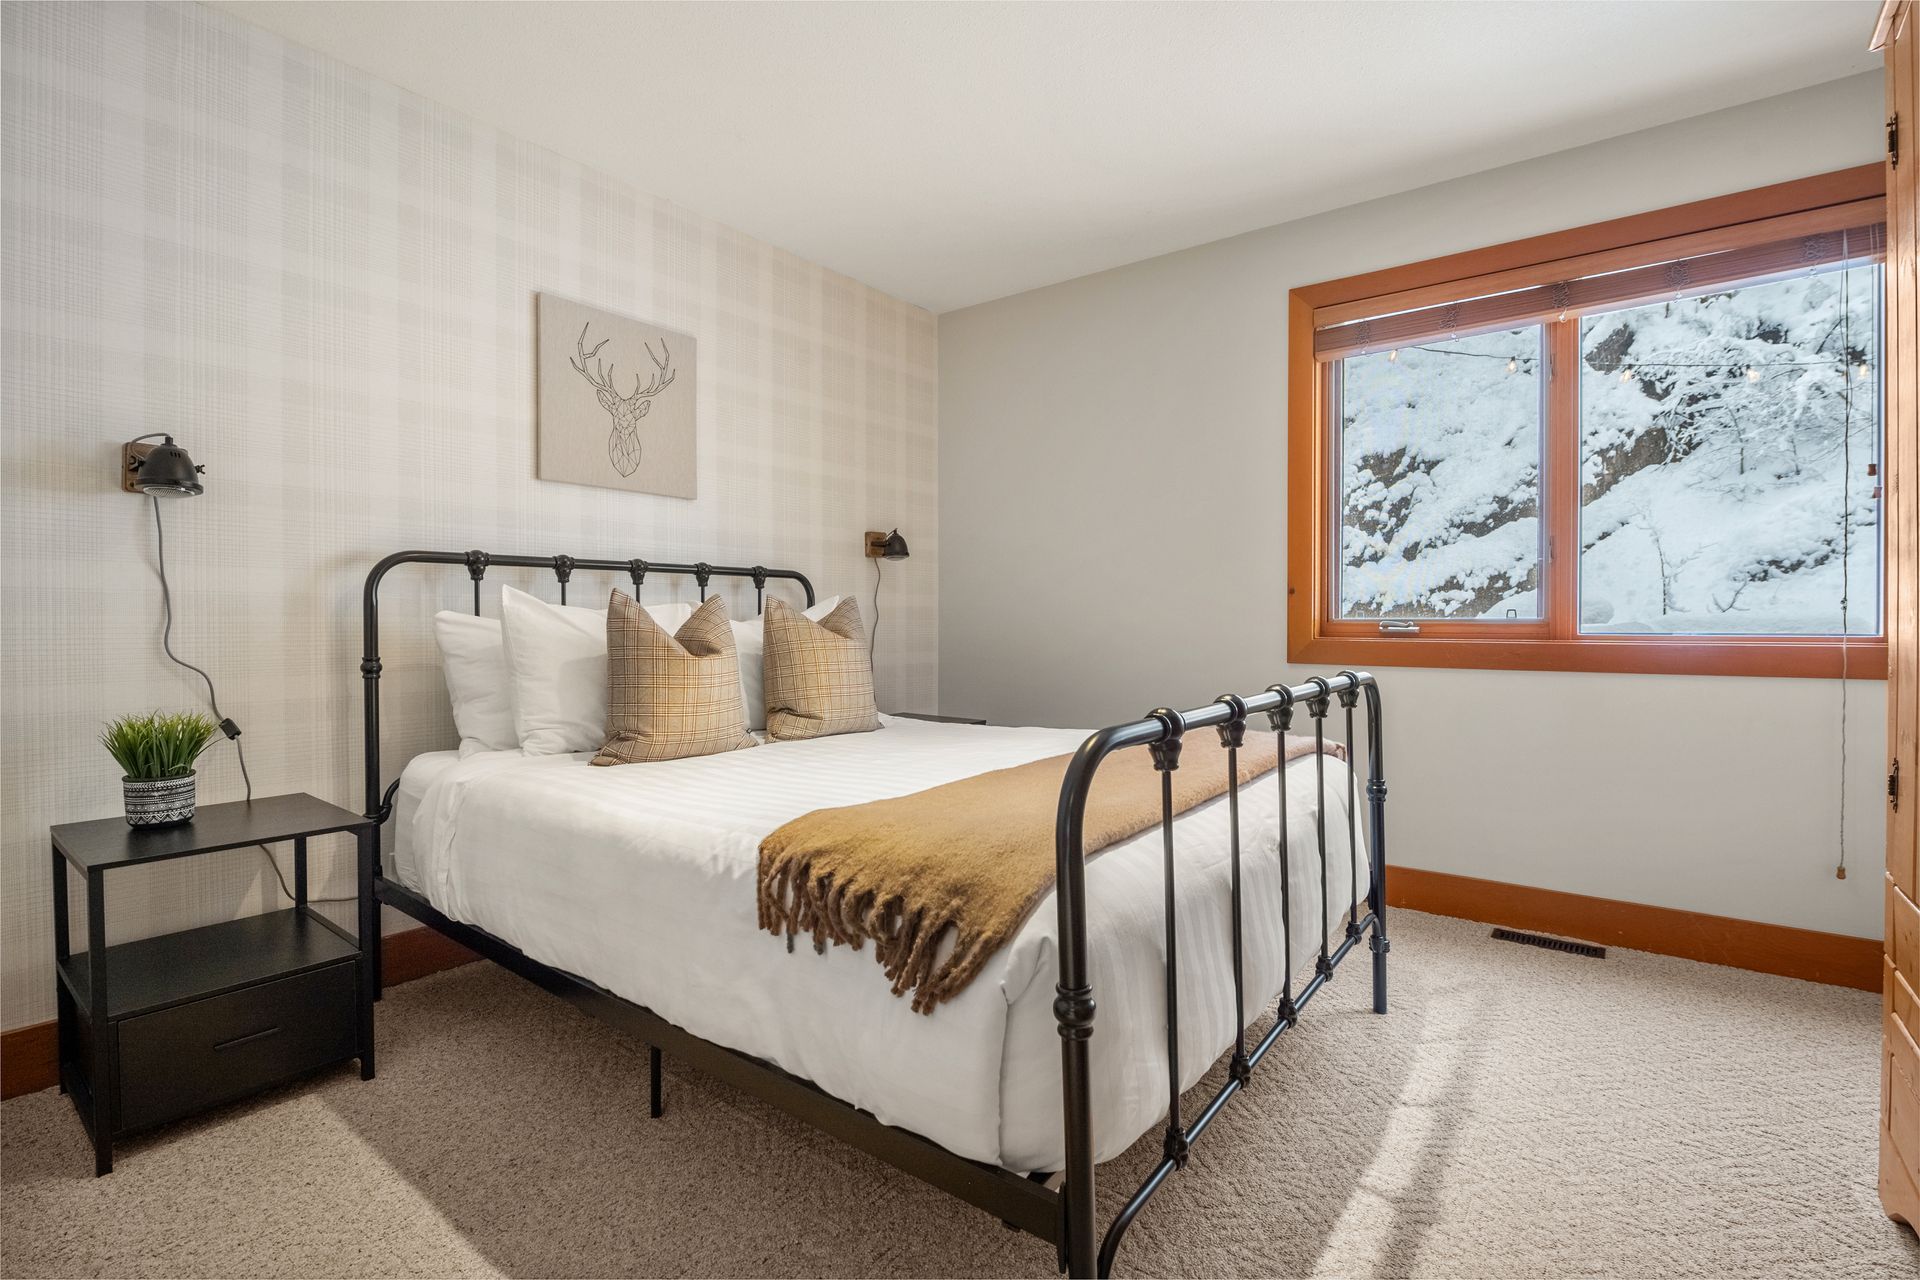 Bedroom of the Greywolf Lodge,  a golf course BC vacation rental hosted by Aisling Baile Property Management.